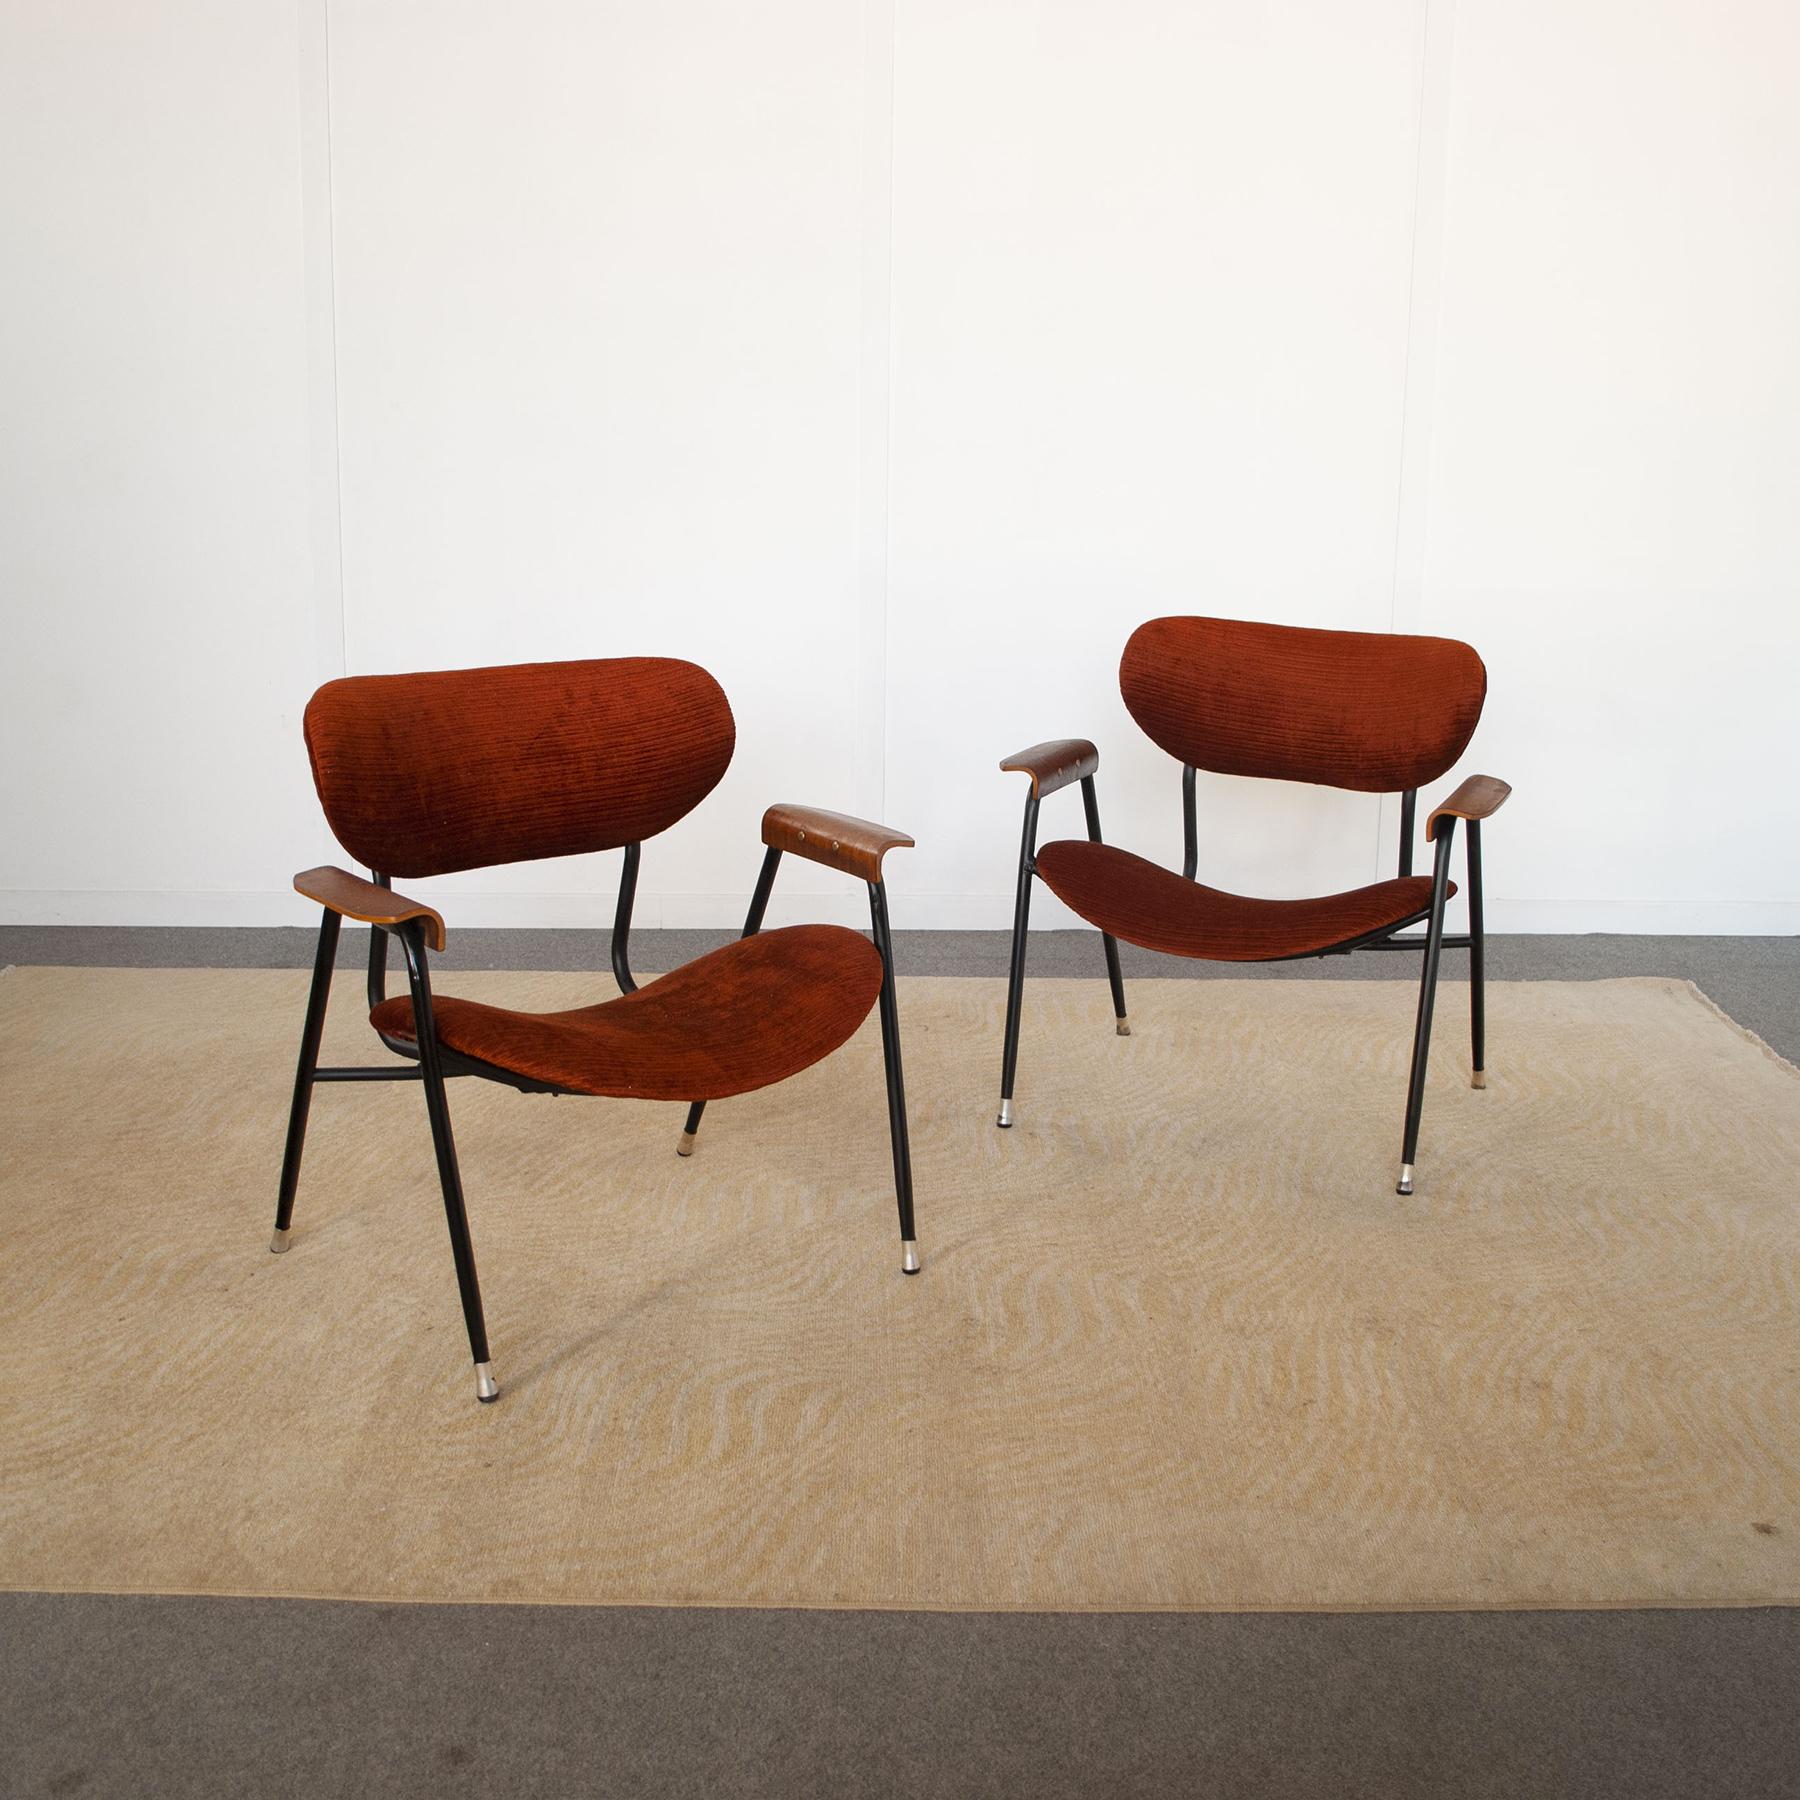 Gastone Rinaldi set of two armchairs for Rima 1950s


Gastone Rinaldi was born in Padua in 1920, and graduated with a degree in accounting from the Belzoni Institute. He initially worked for the Rima company on Via Guido Reni in Padua, founded by